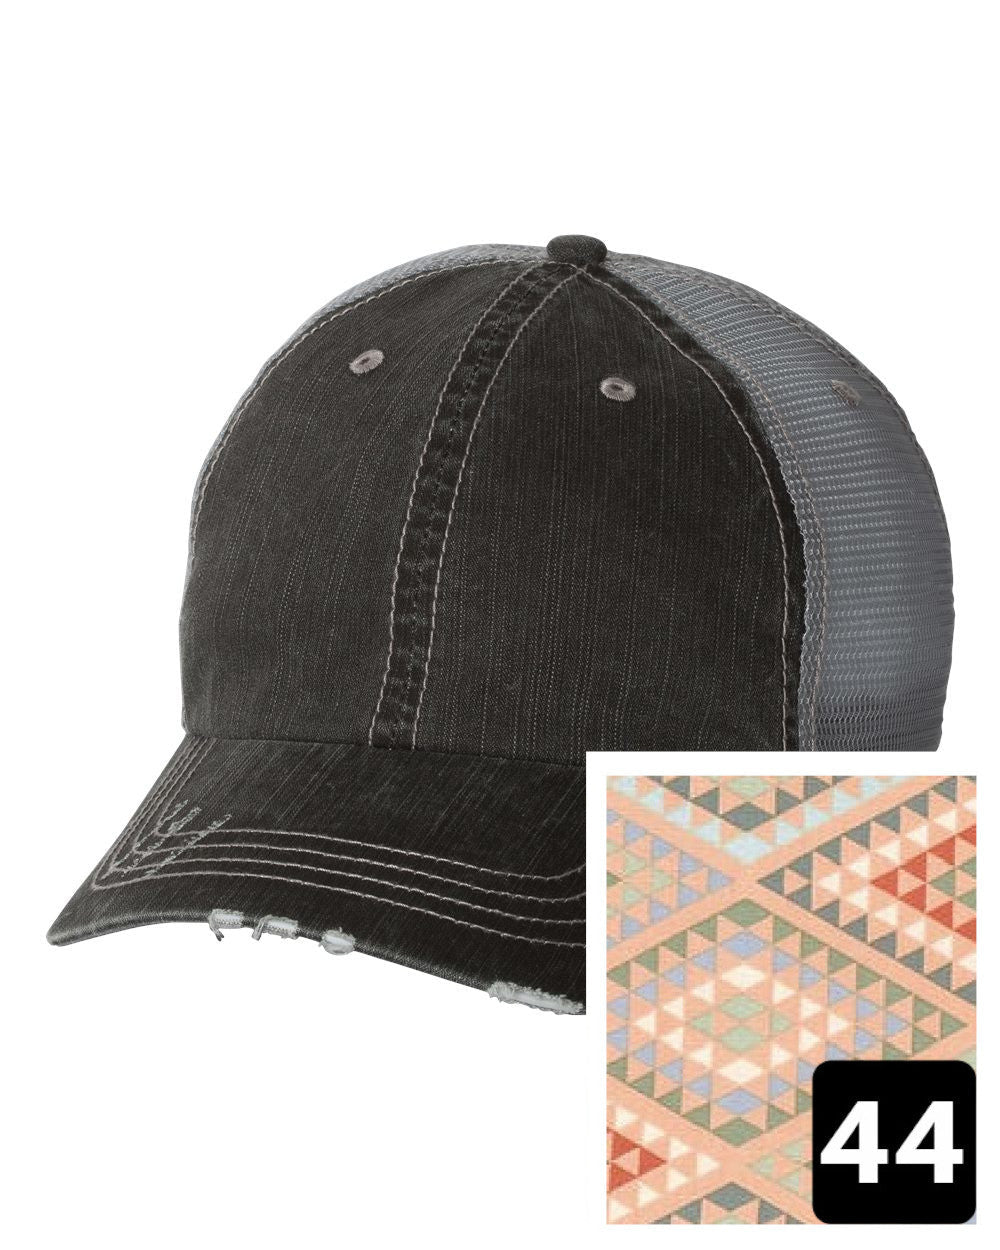 gray distressed trucker hat with navy coral and white chevron fabric state of Vermont